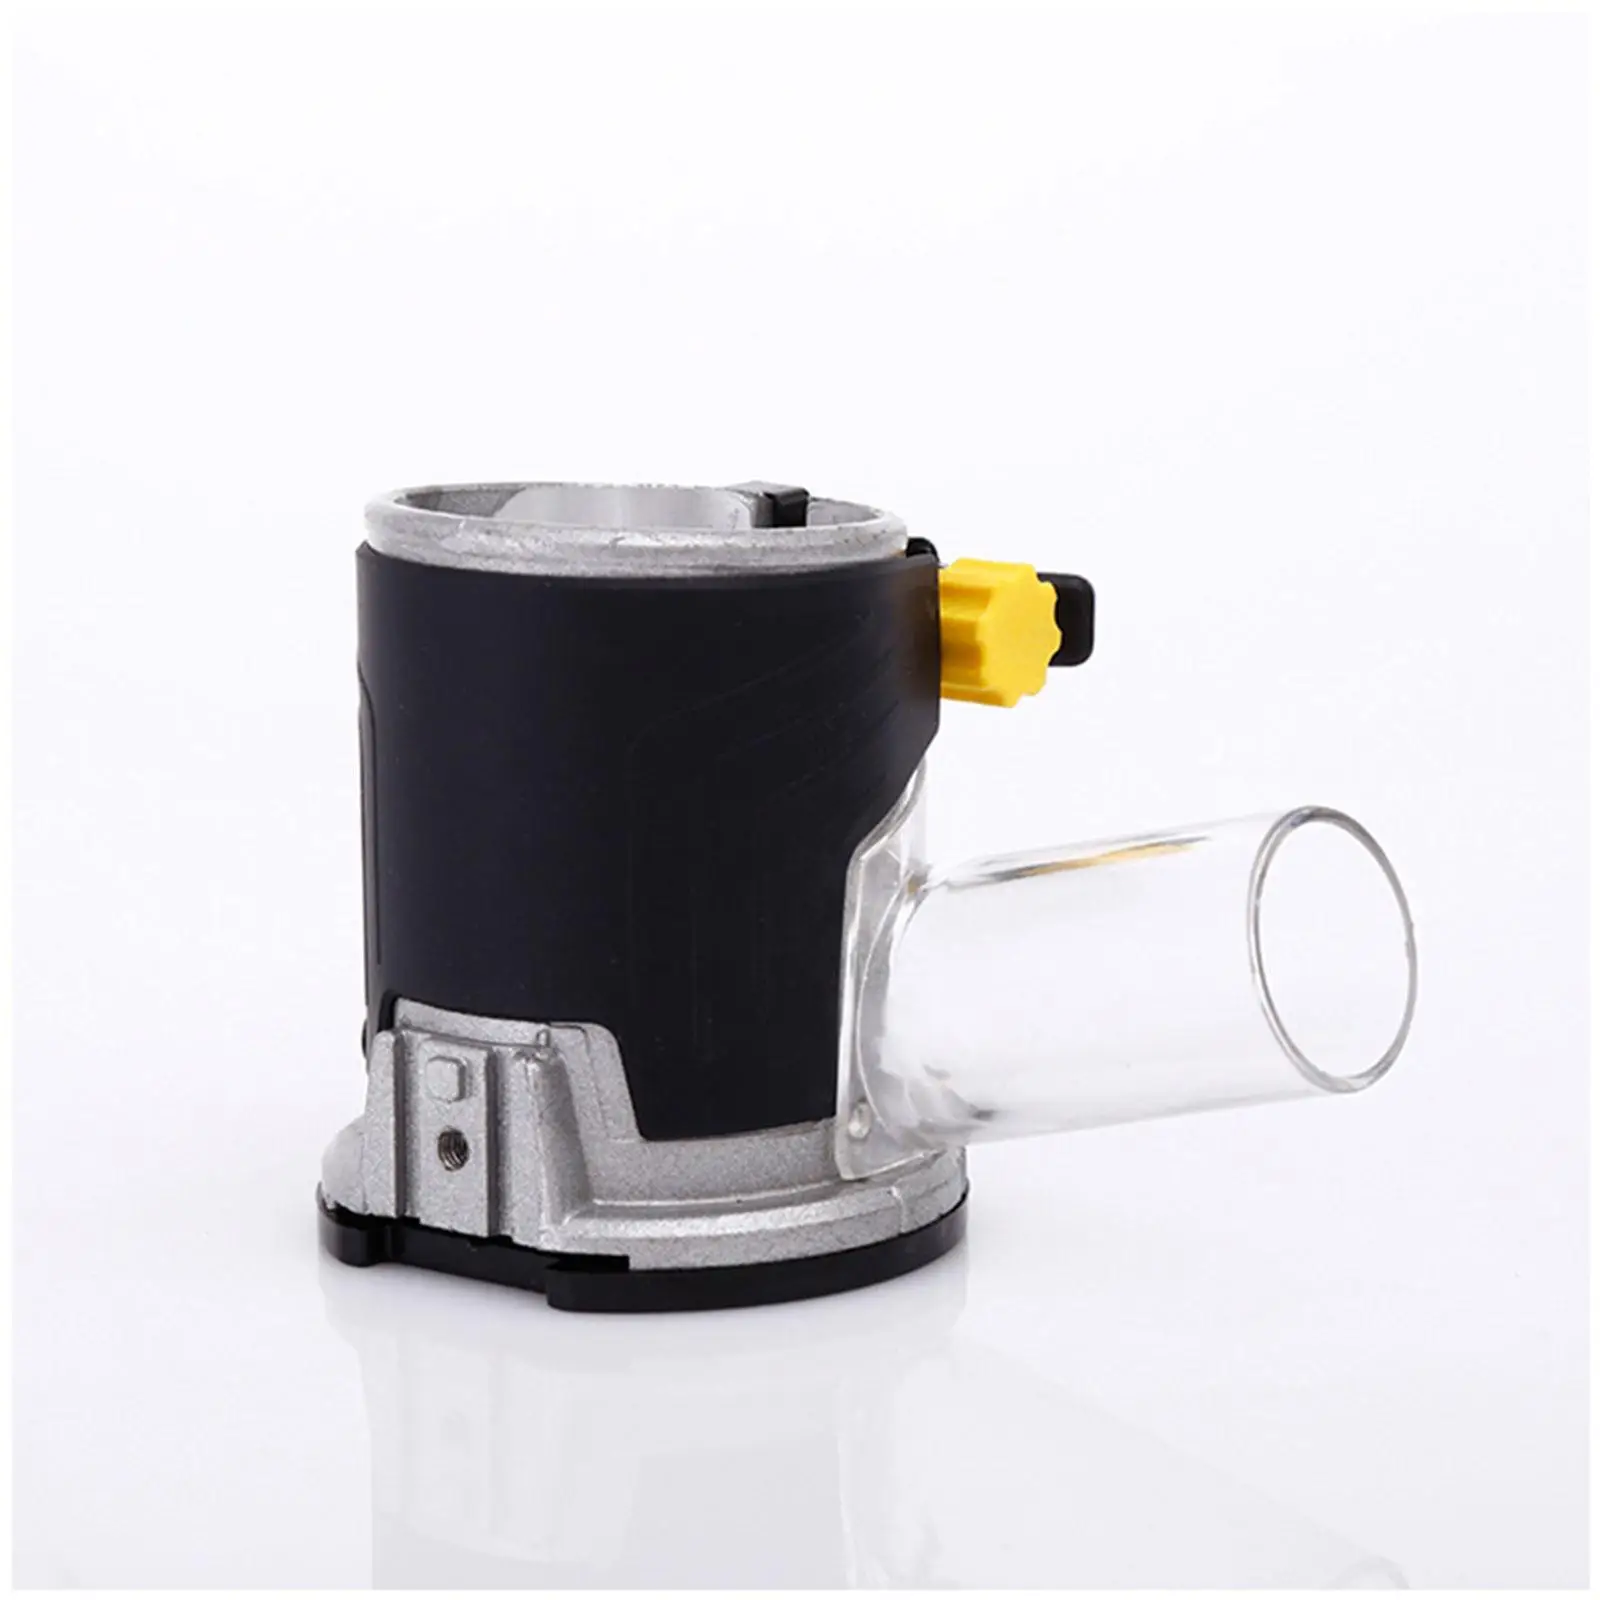 Trimming Machine Base Replacement Accessory Power Tool Electric Trimming Machine Base Dust Cover Trimming Joiner for route